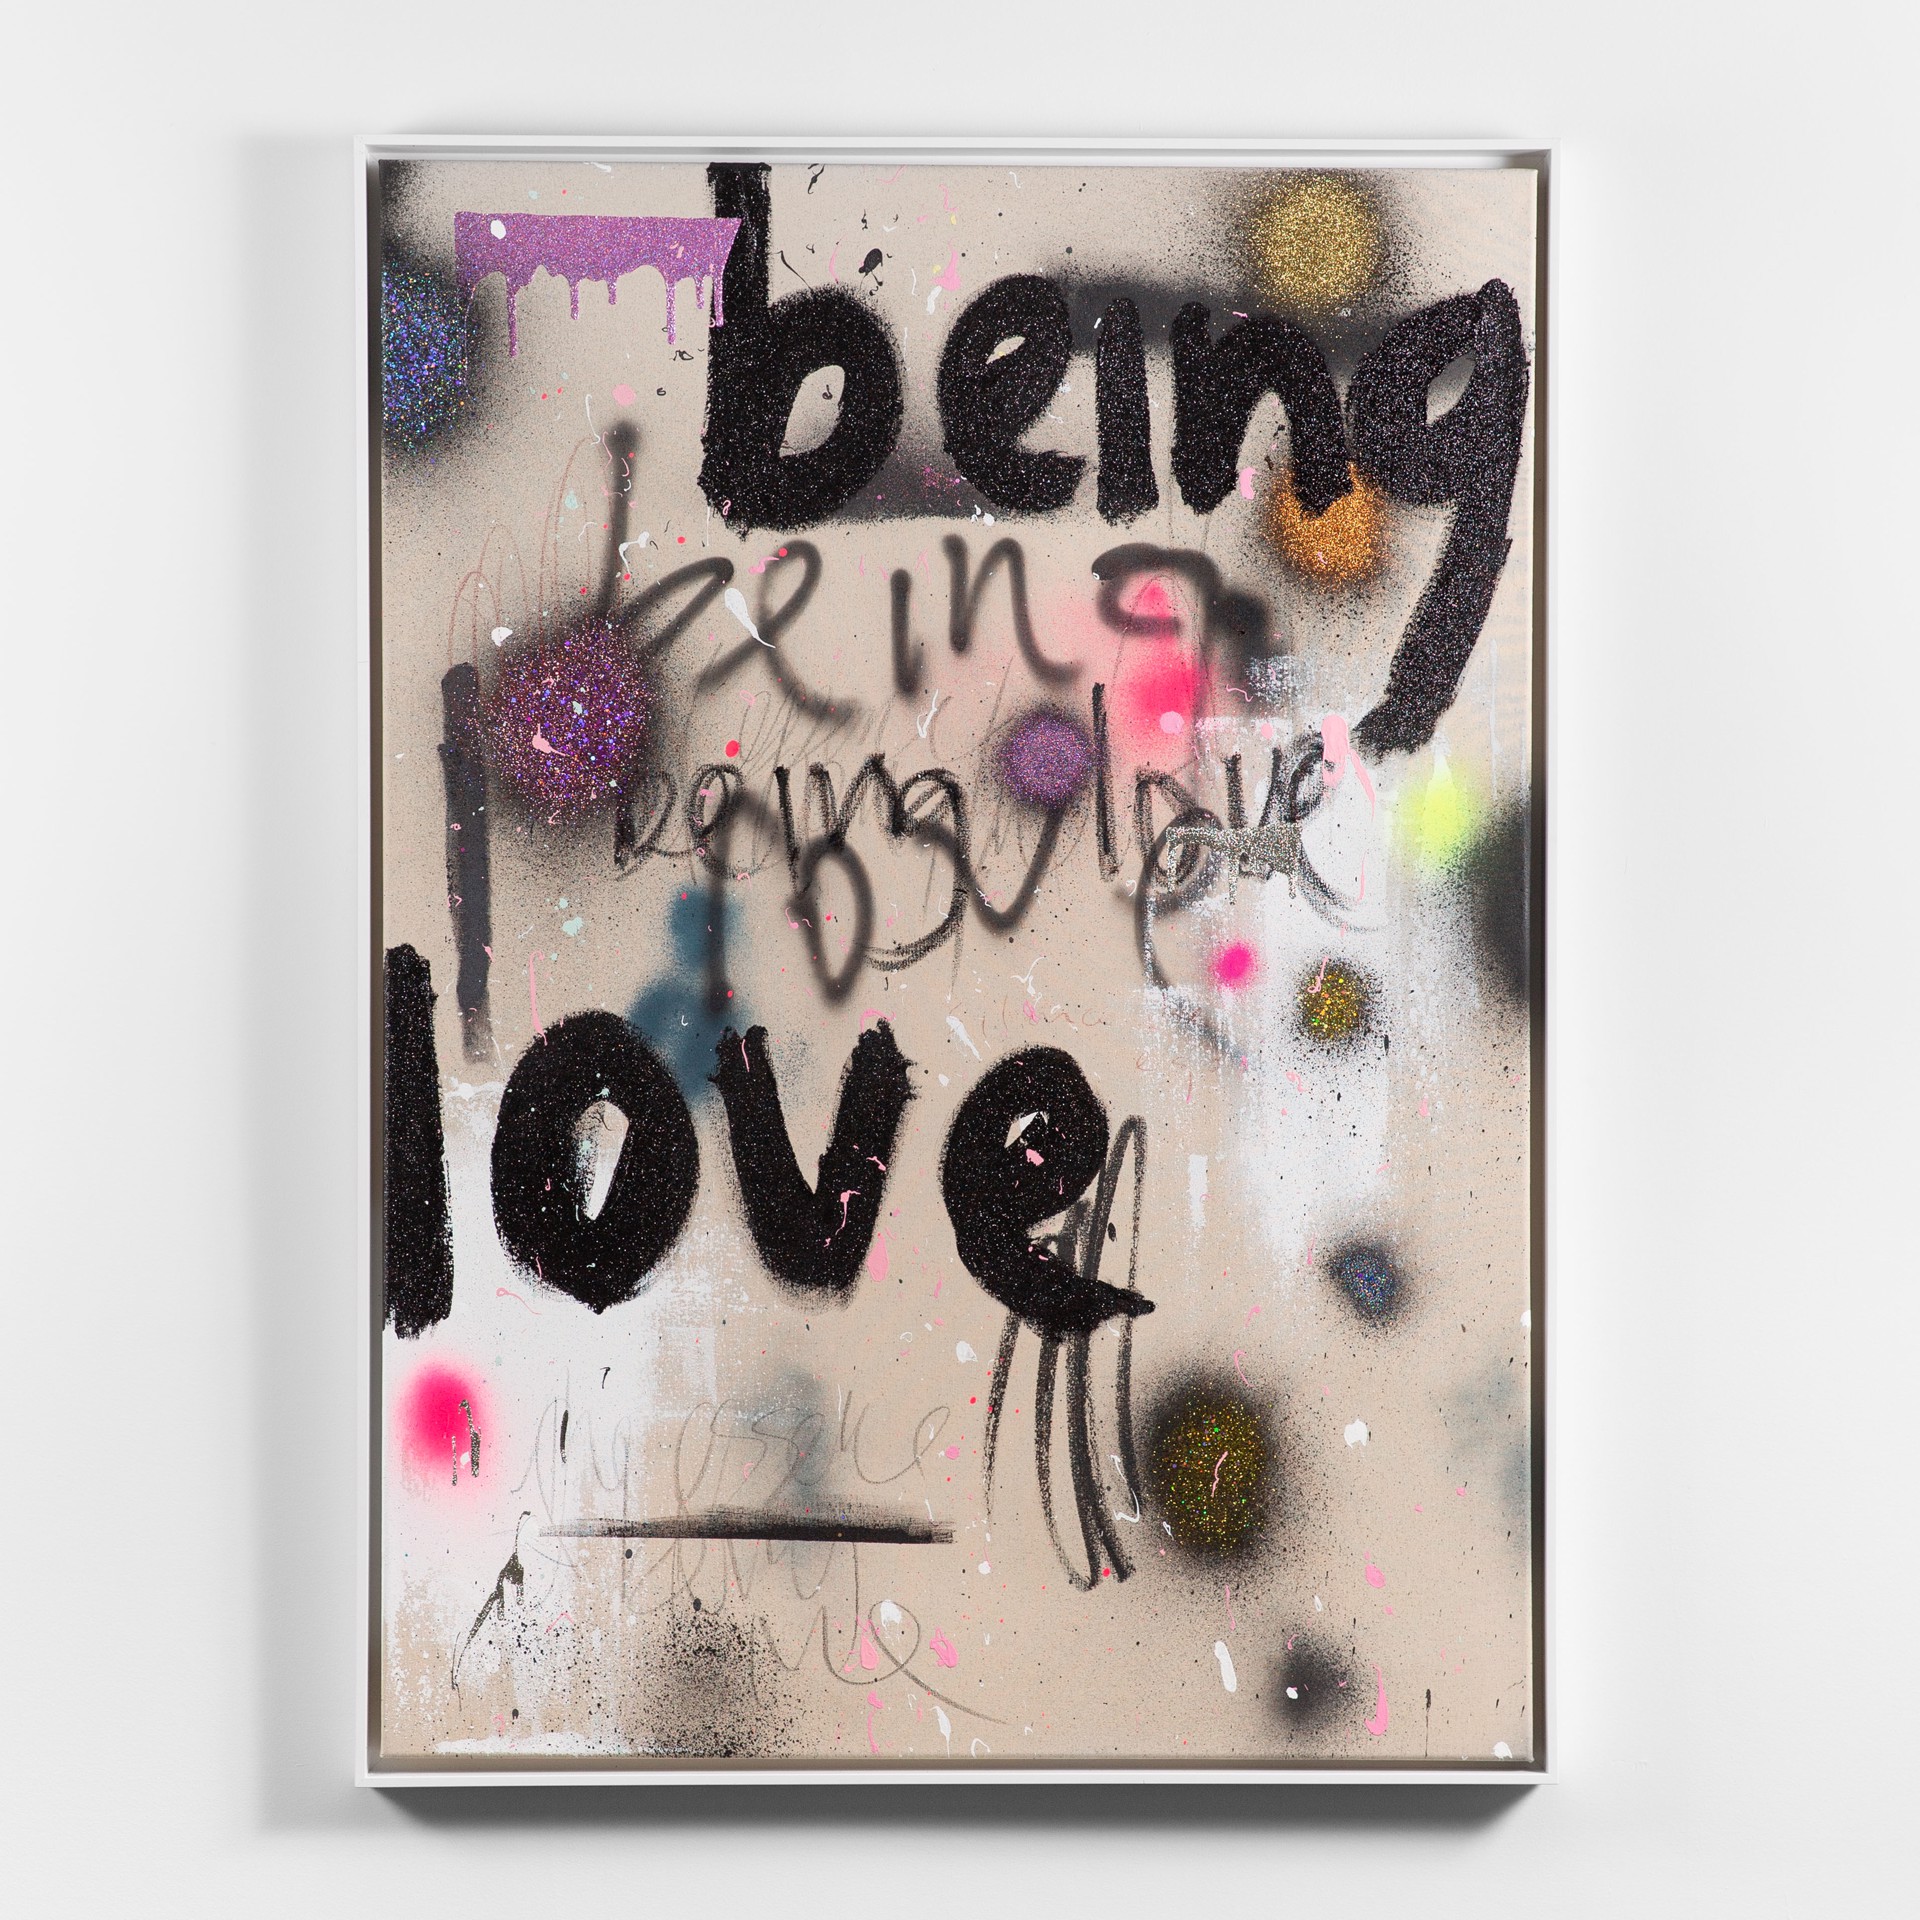 Being Love by Jeremy Brown